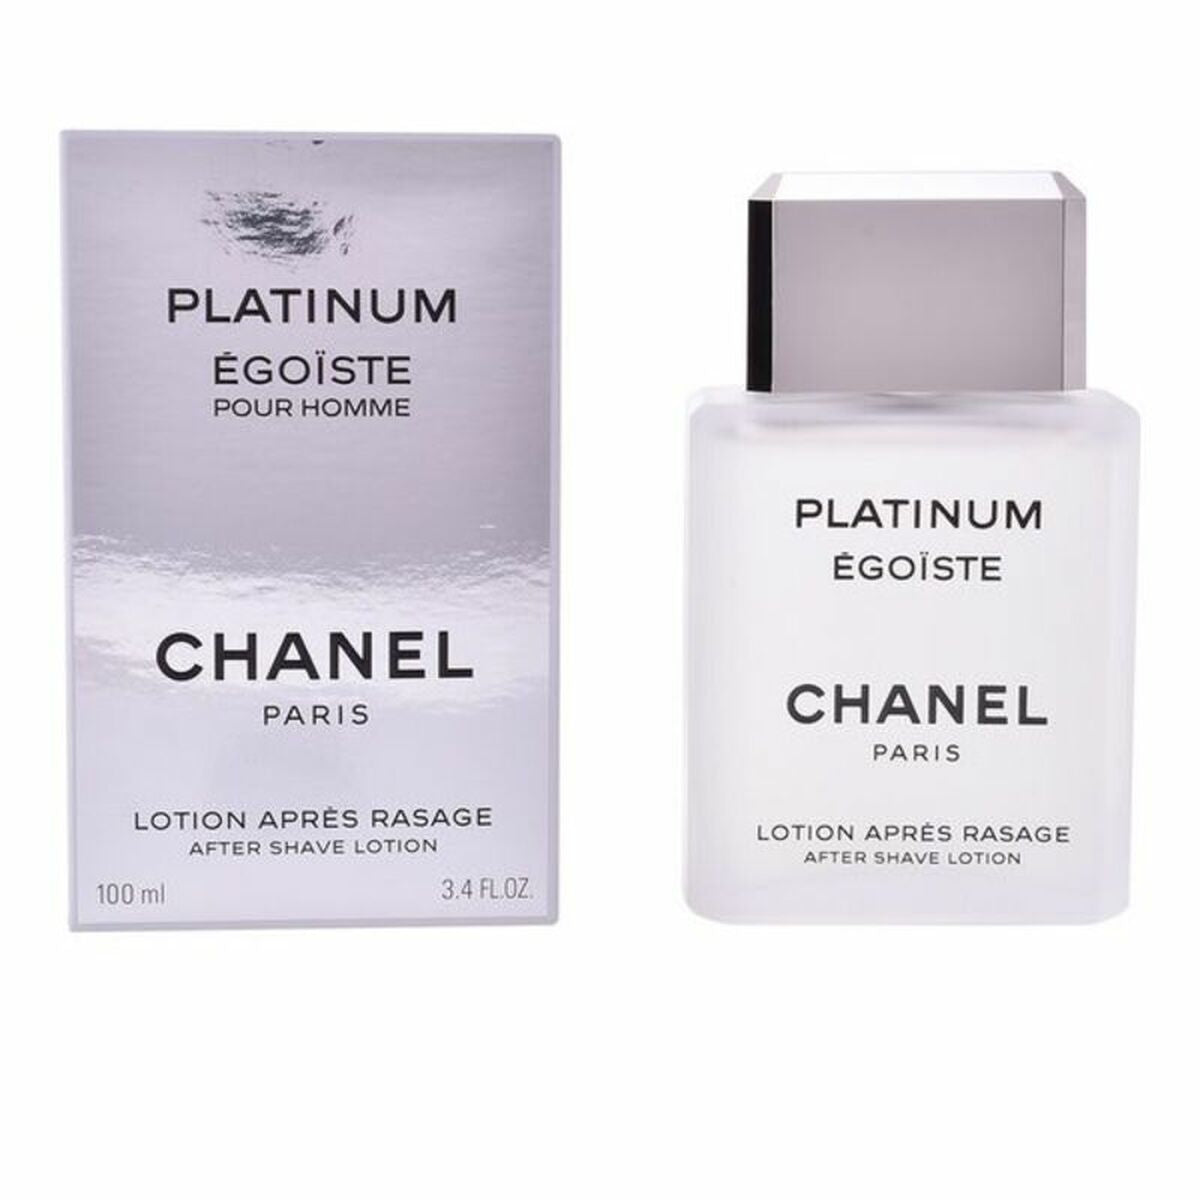 Kaufe Aftershave Lotion Chanel 100 ml bei AWK Flagship um € 93.00